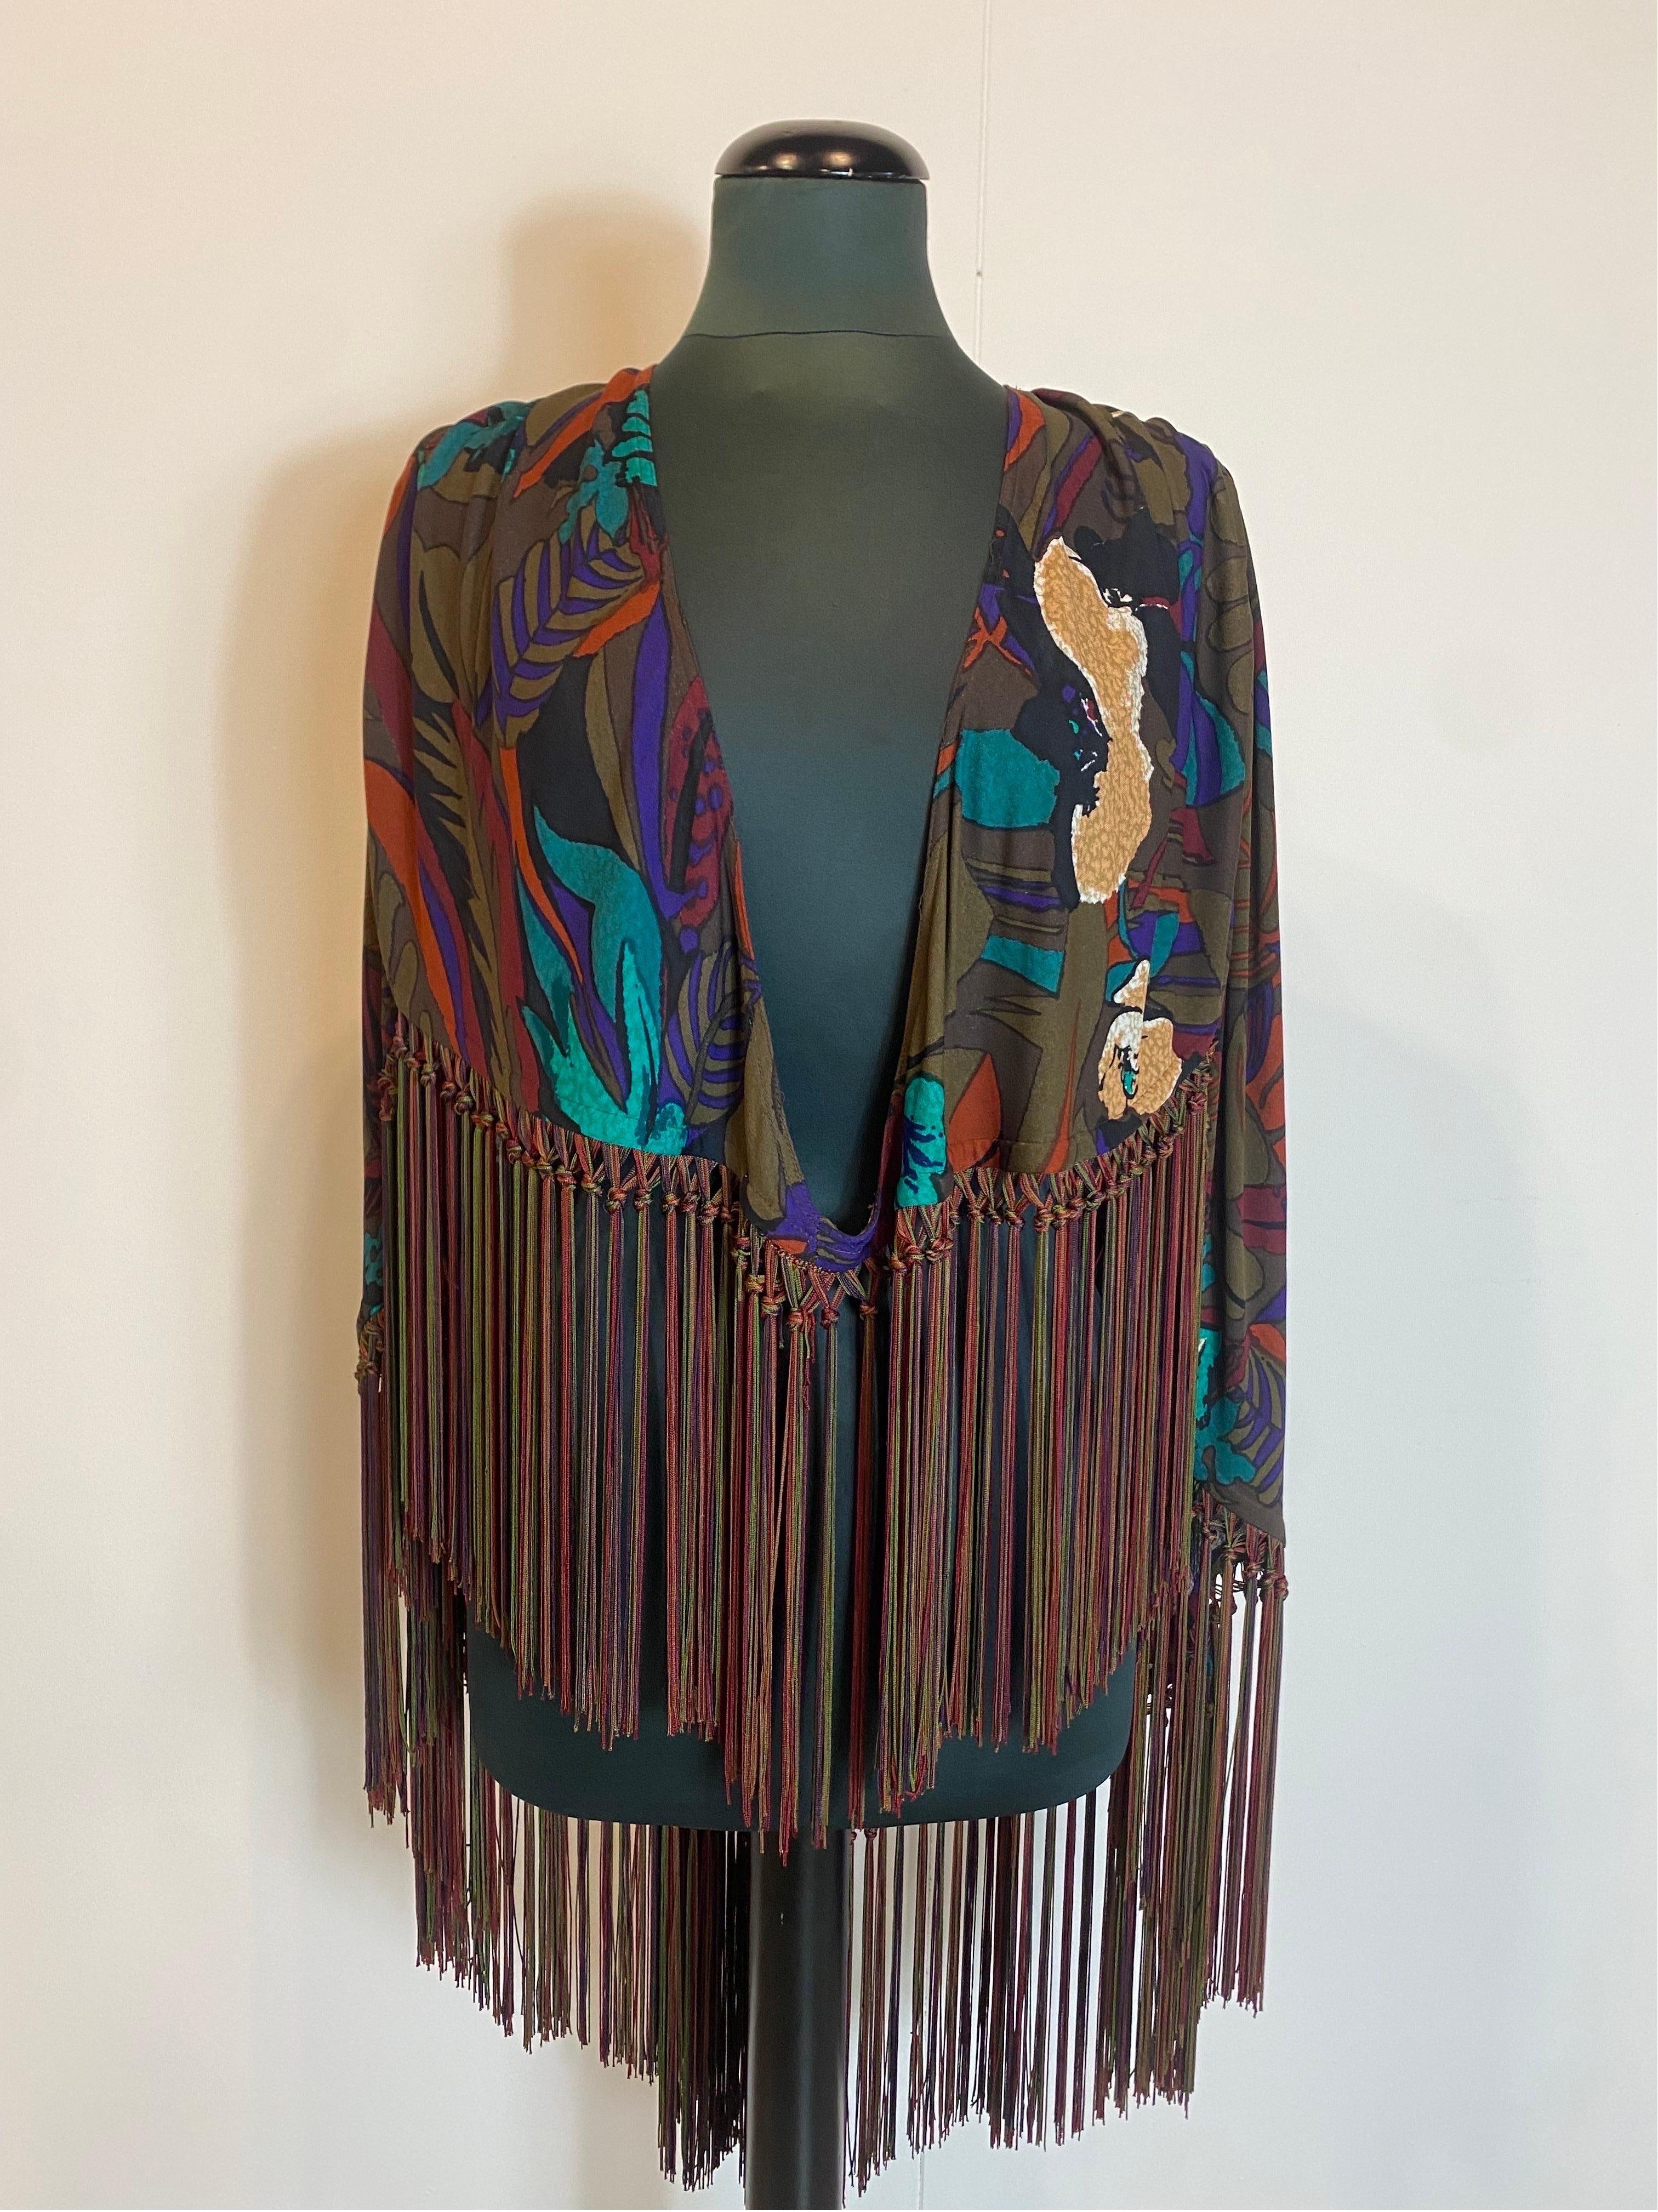 Callaghan floral cape with fringes
In shades of burgundy brown.
Wonderful longer at the back. With gathering along the shoulders.
Size 42
Front length 40cm without fringes
Back length 81cm without fringes
In excellent condition, shows signs of